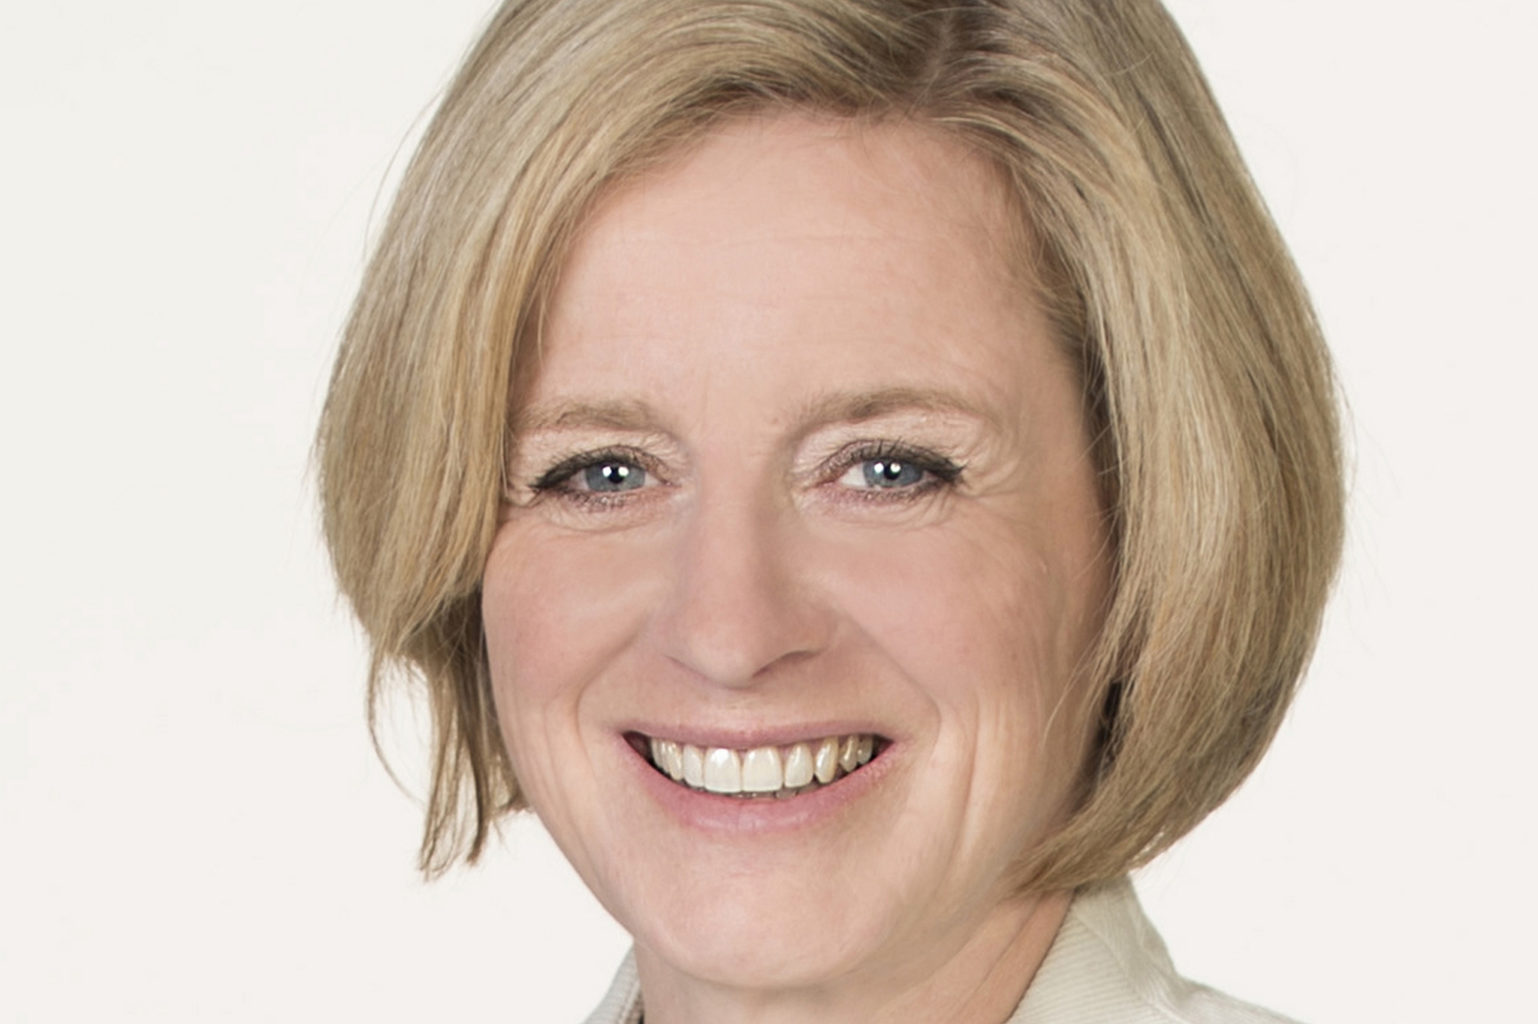 Premier Notley: 2017 was the year Alberta turned the corner. In 2018, Alberta will take the lead.